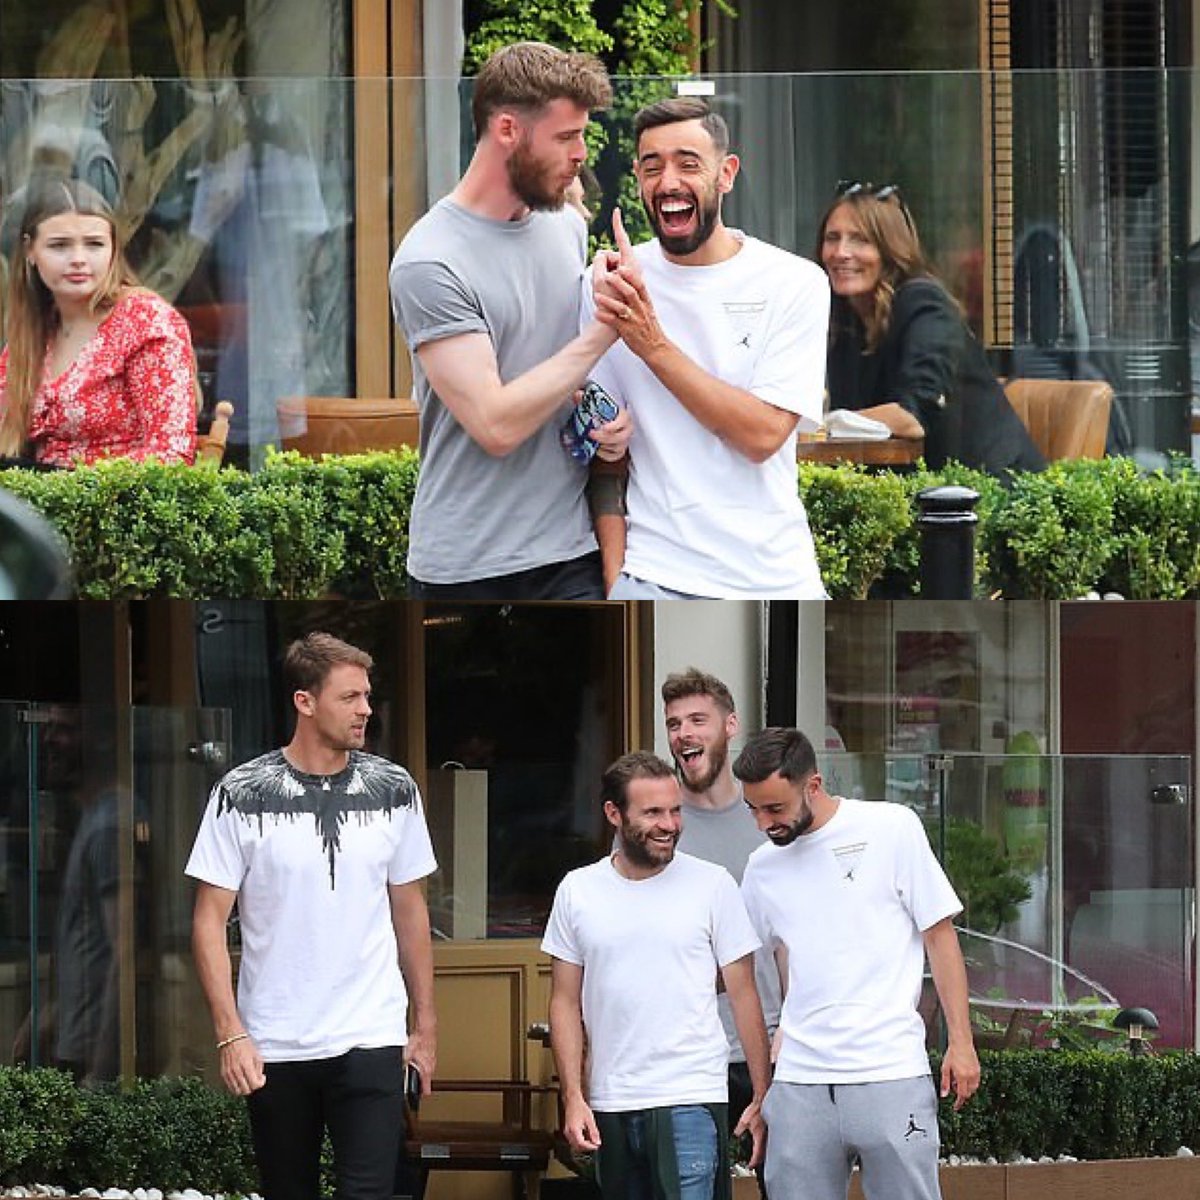 @juanmata8 @B_Fernandes8 @D_DeGea You three are  brothers in arms 🤩🤩🤩